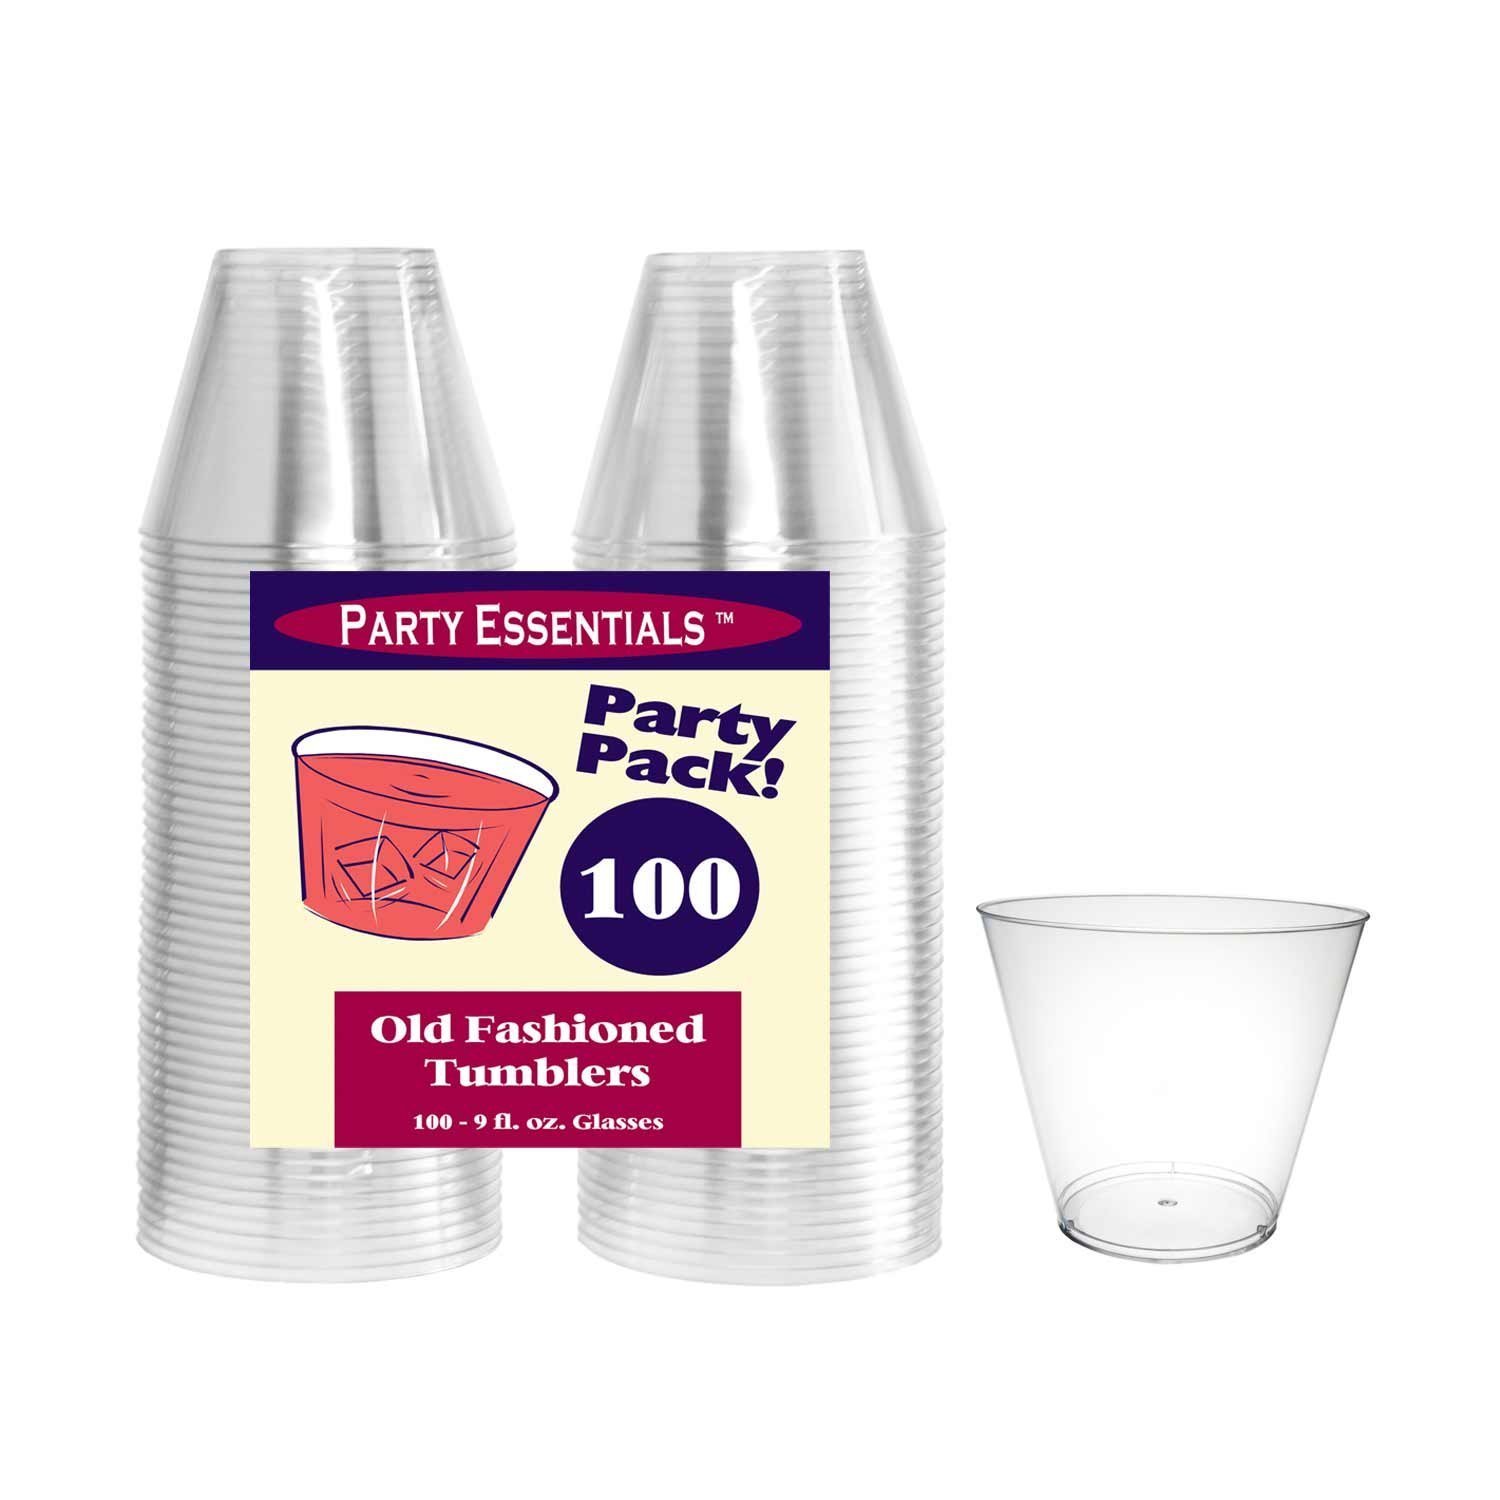 Party Essentials 9 oz Disposable Party Cups, Old Fashioned Tumblers, Cocktail Wine Glasses for Home, Picnic, Wedding, Birthday, 100 Count (Pack of 1), Clear, Hard Plastic